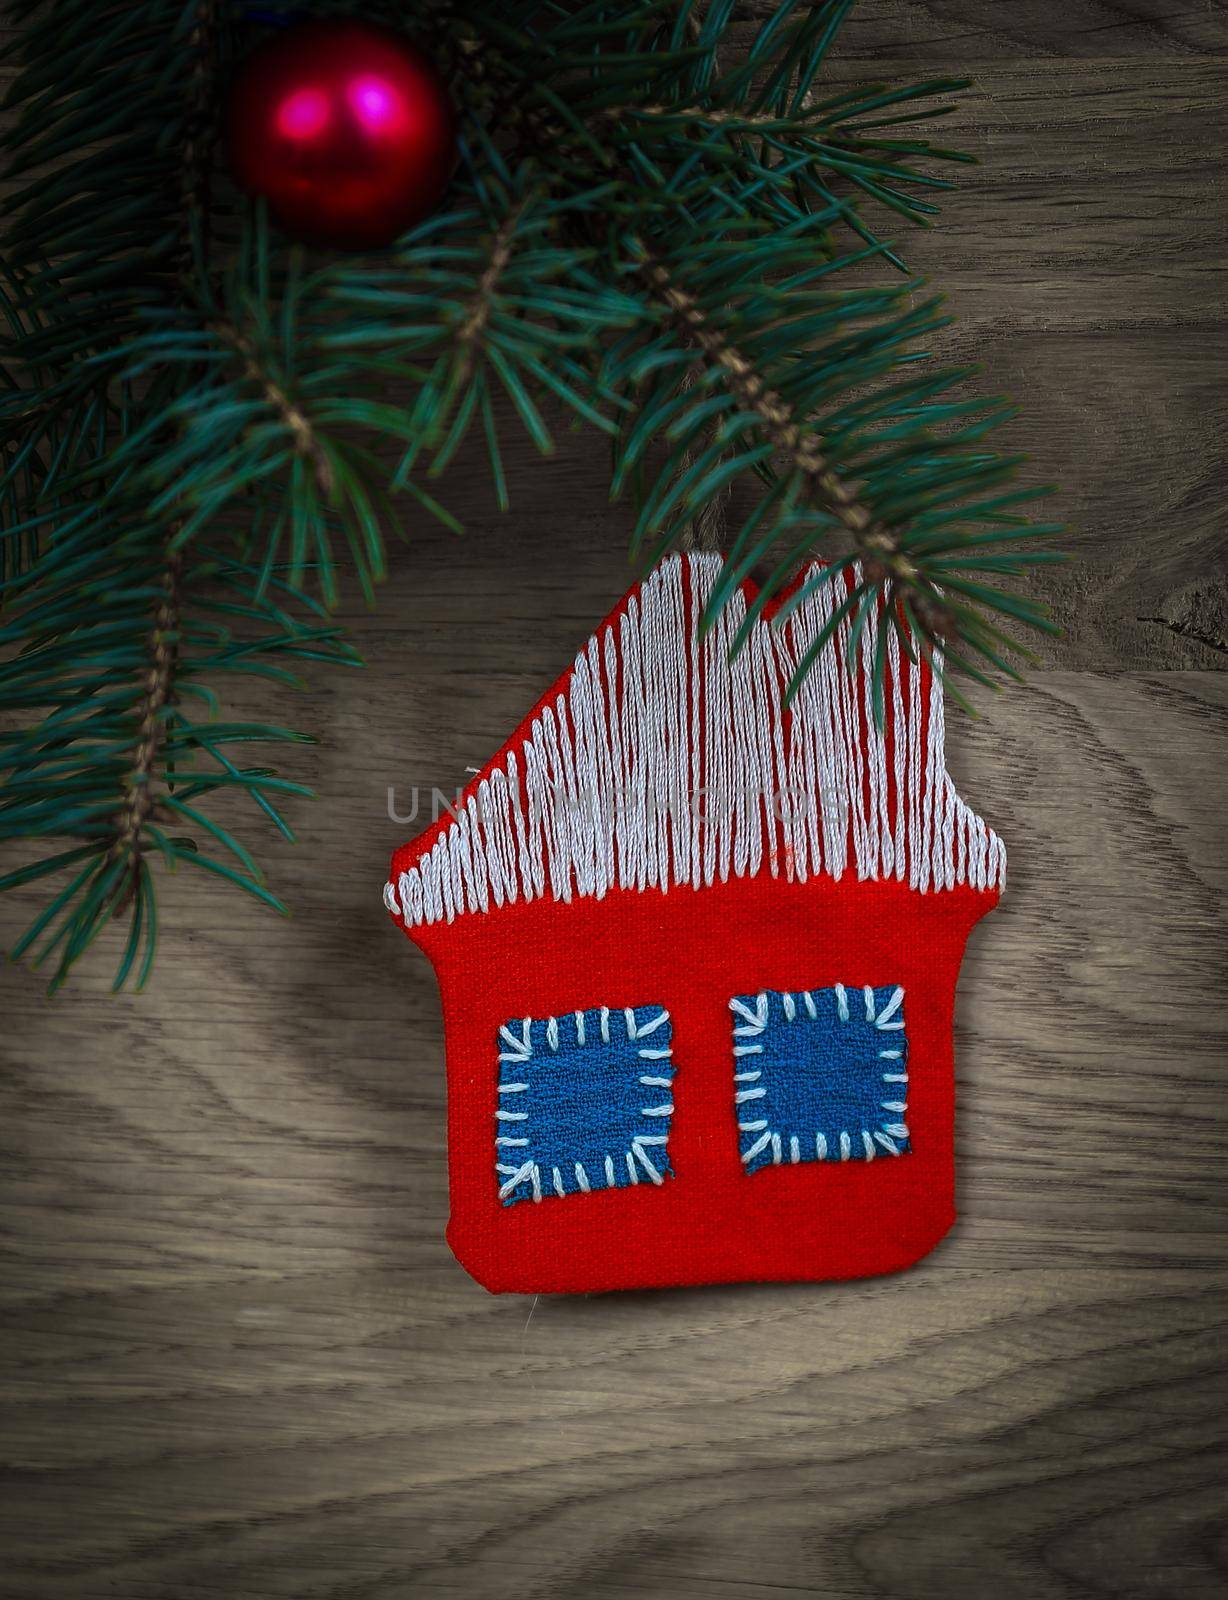 concept of Christmas.knitted house and pine branch on wooden ba by SmartPhotoLab